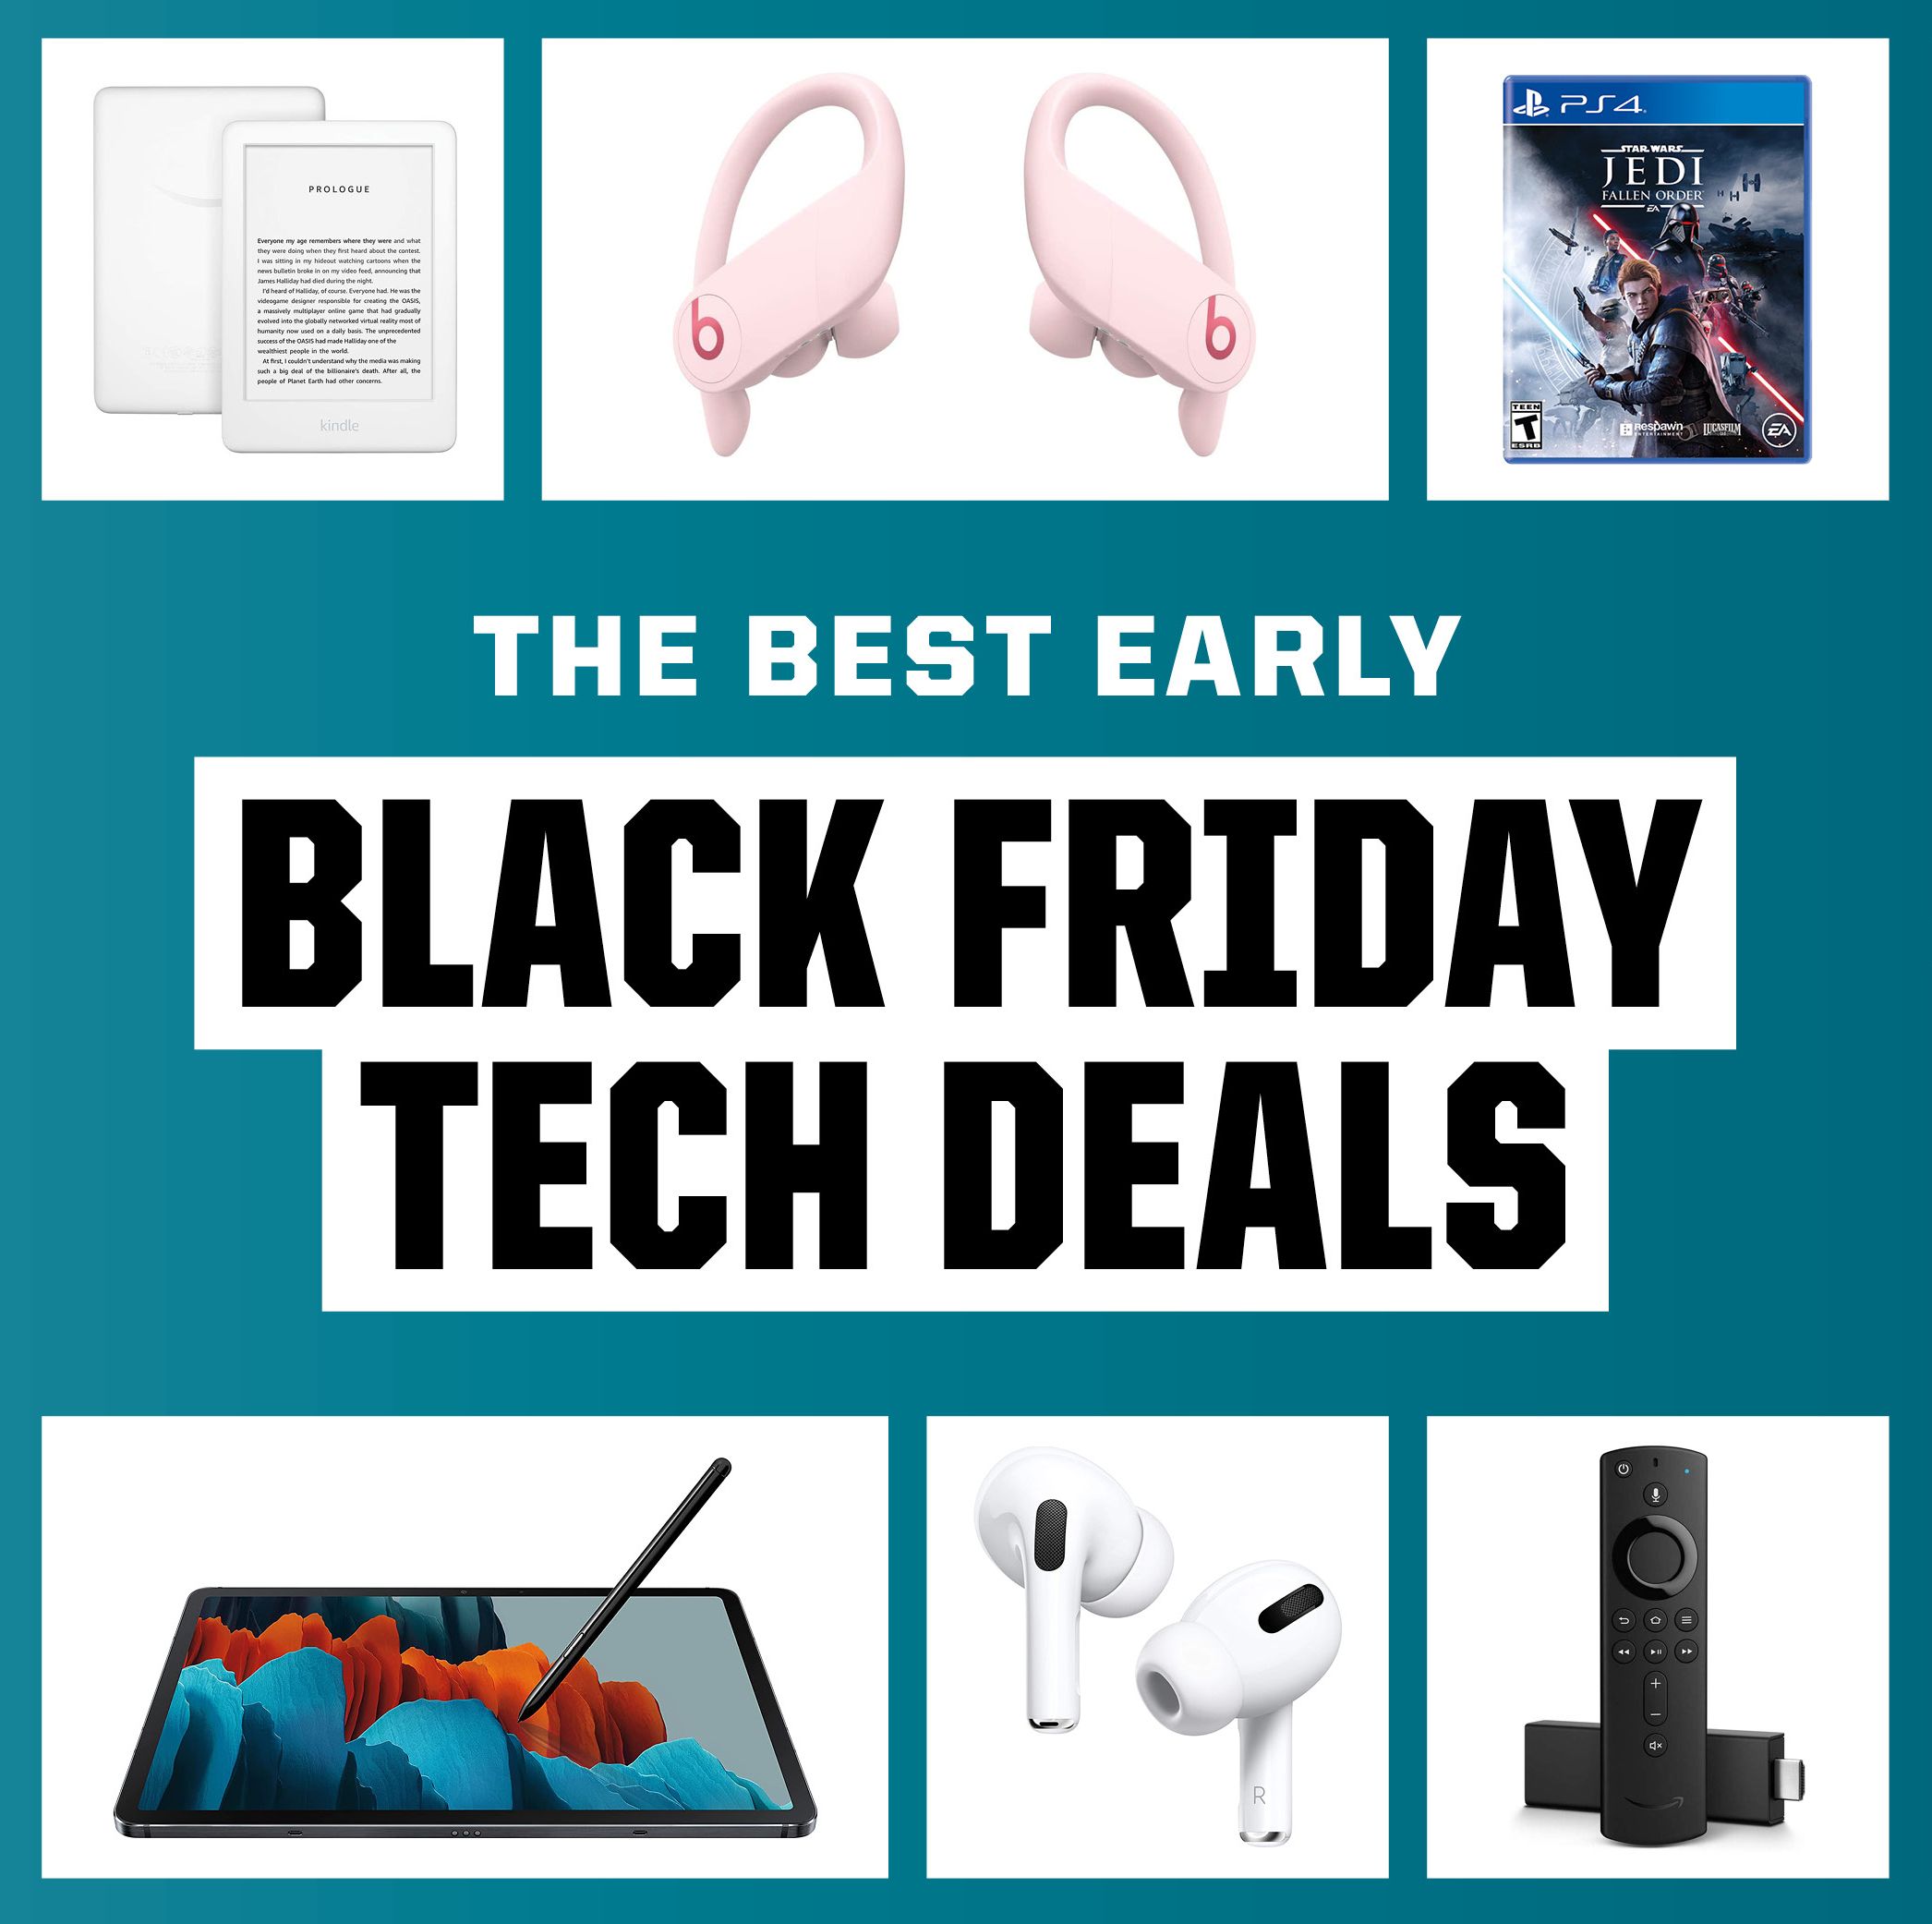 There's No Doubt That These Are the 20 Best Black Friday Deals Across Tech Categories